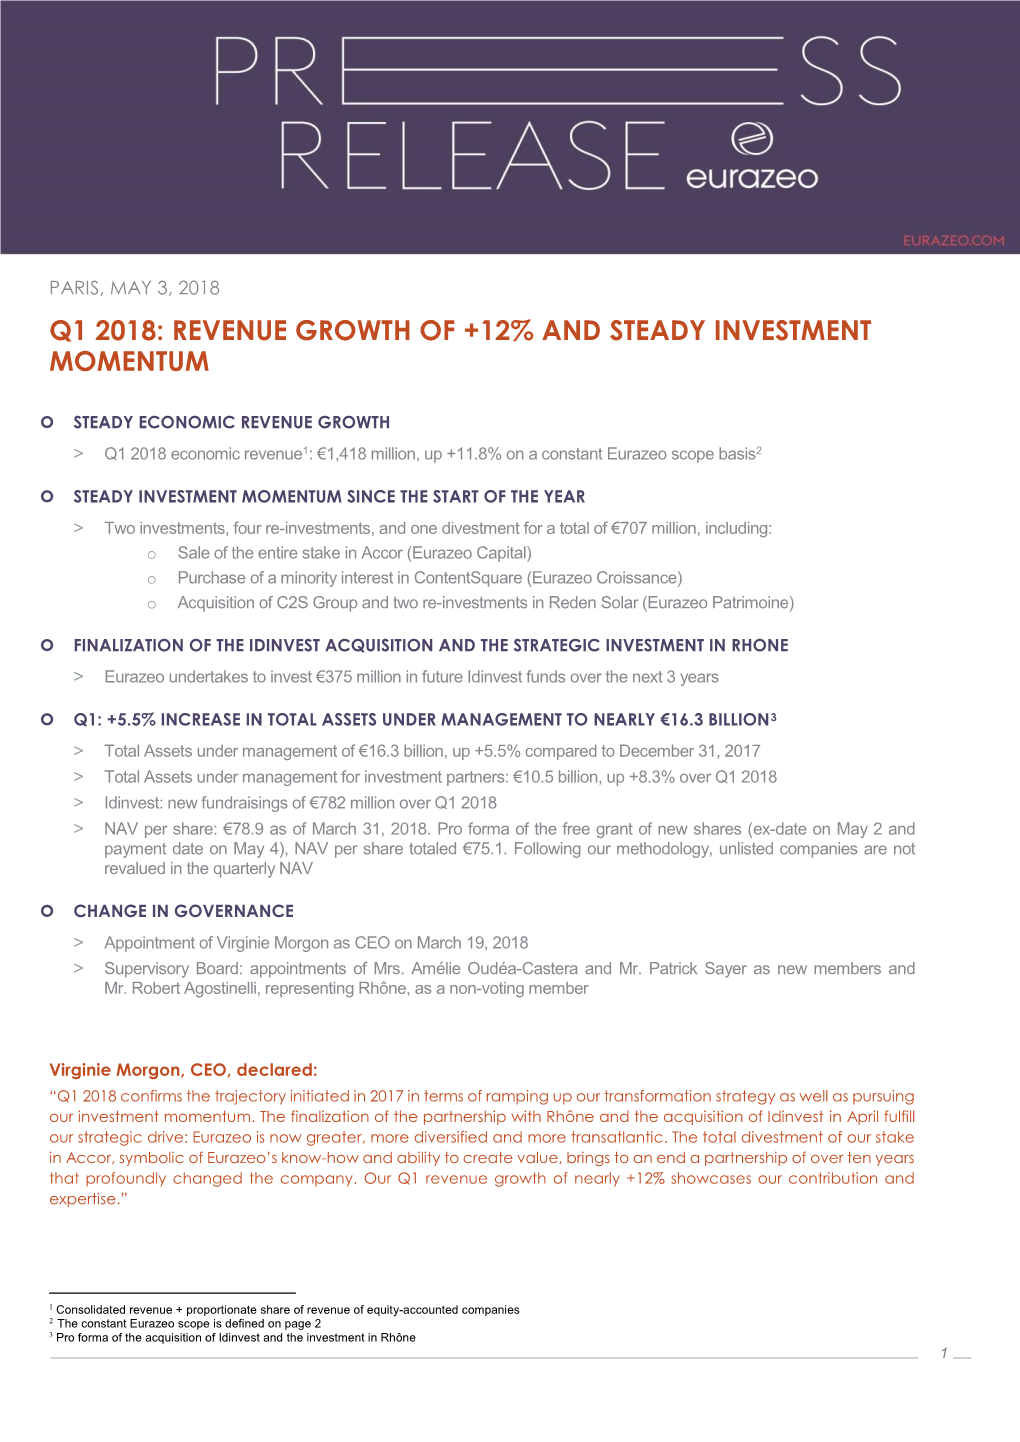 Q1 2018: Revenue Growth of +12% and Steady Investment Momentum